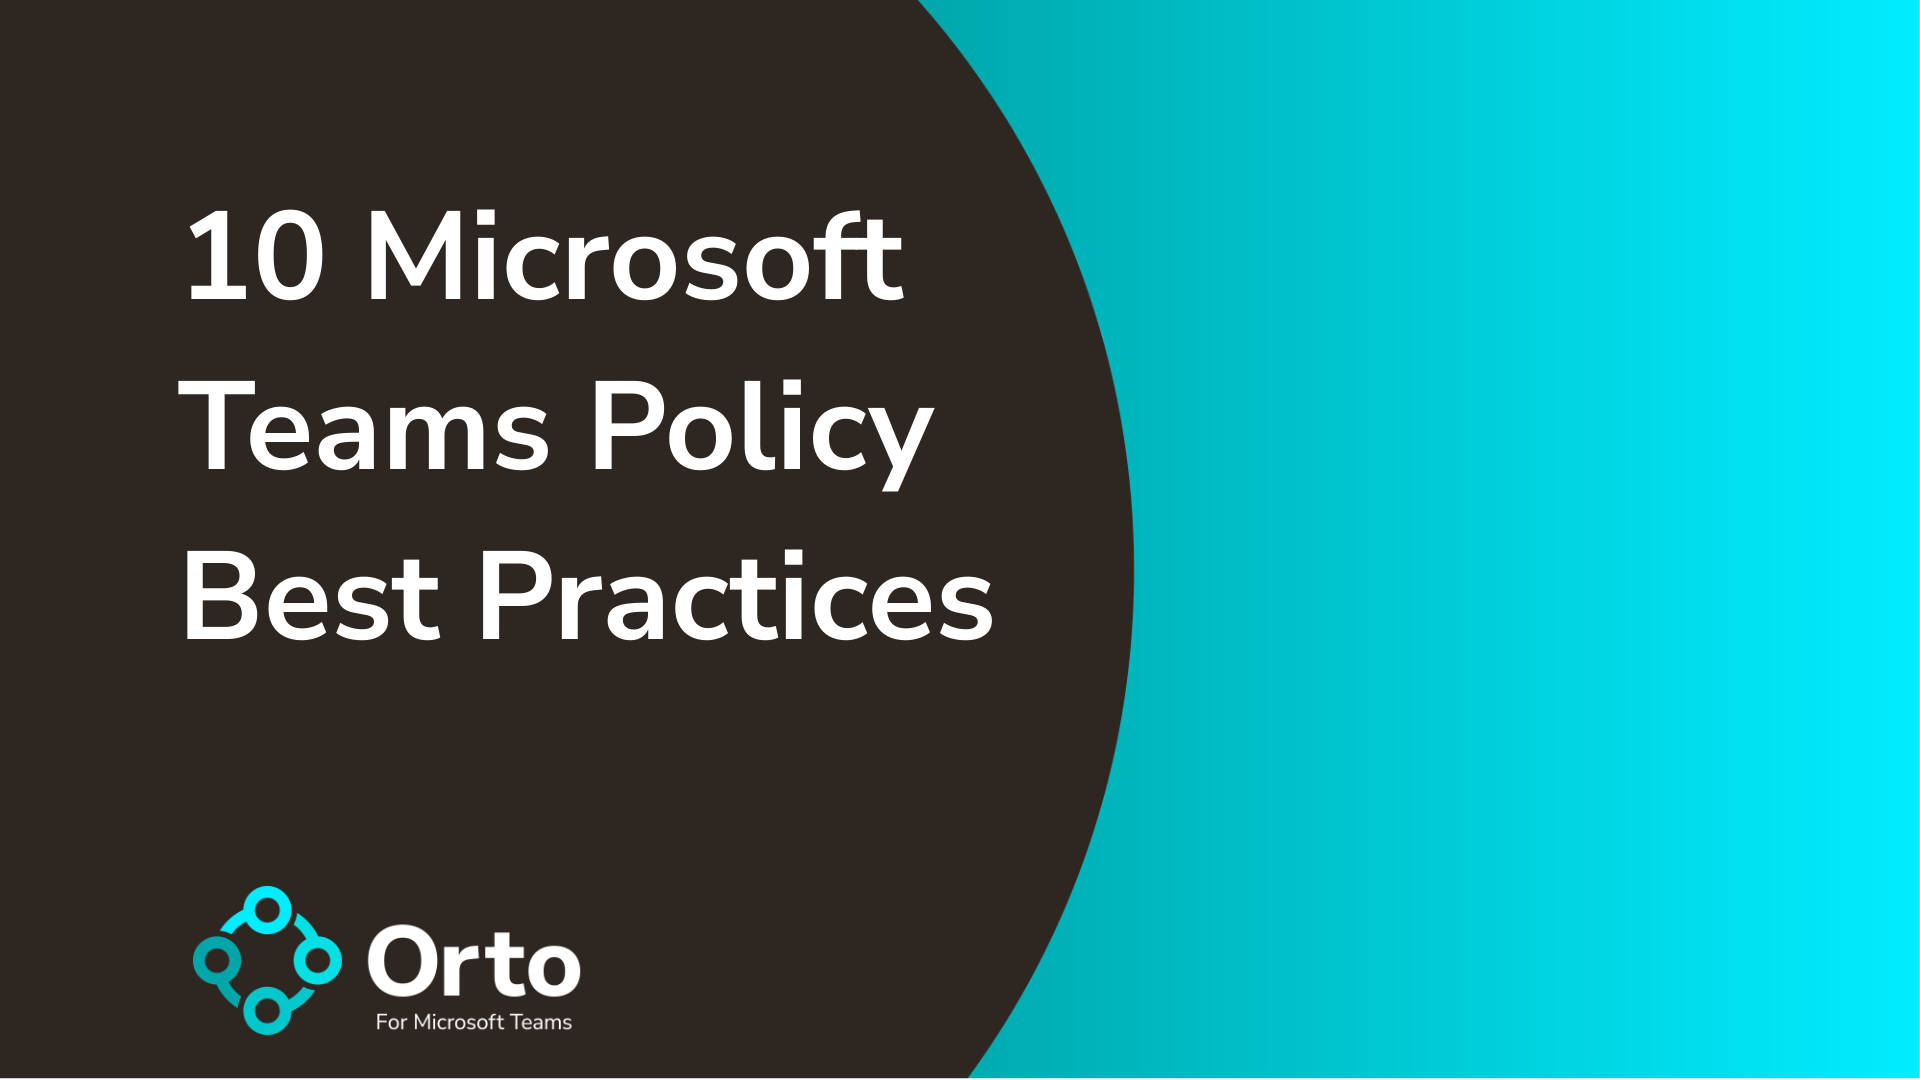 Microsoft Teams policy best practices